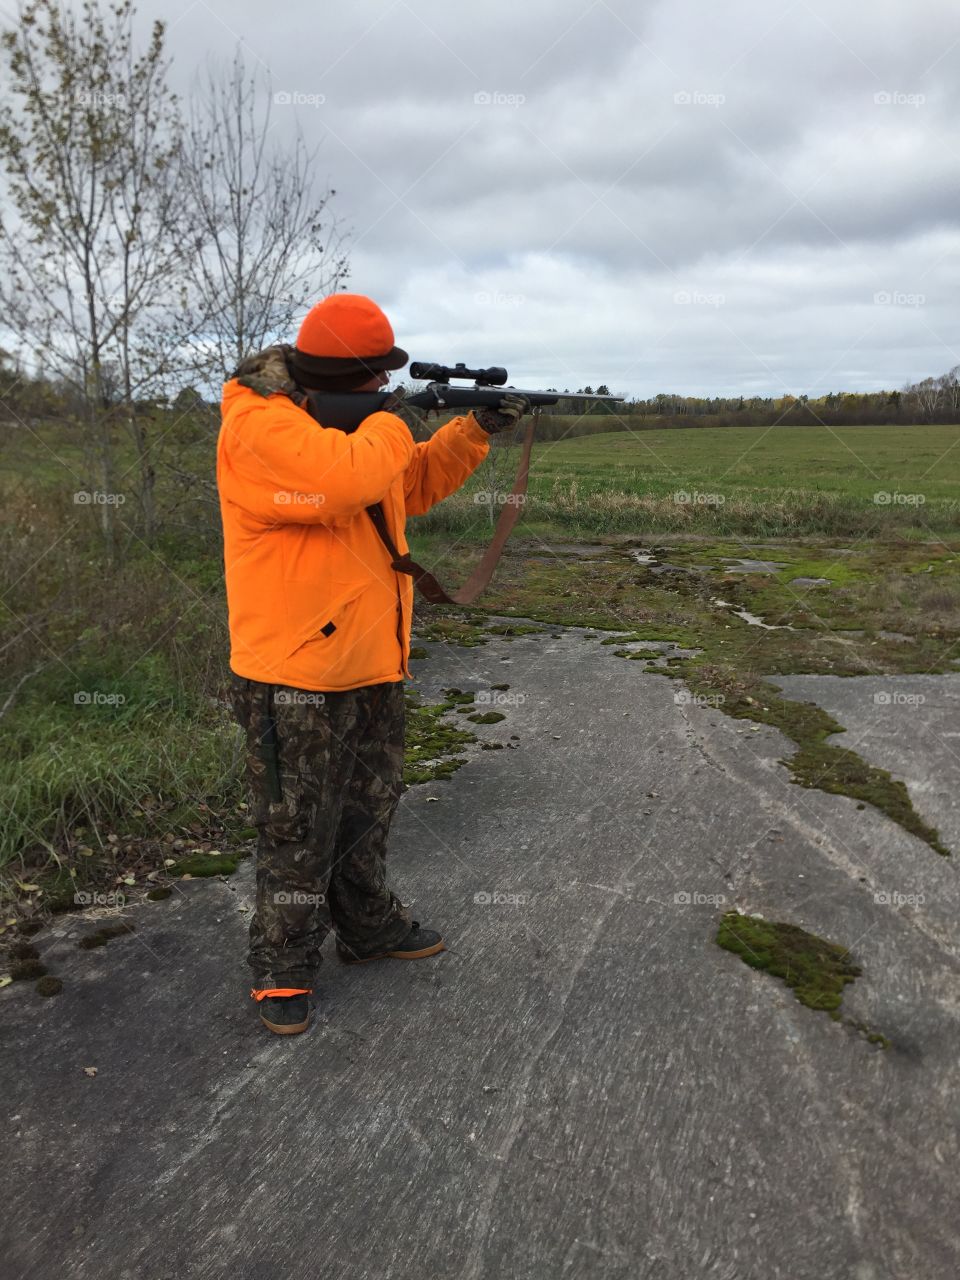 Setting the scope before the hunt